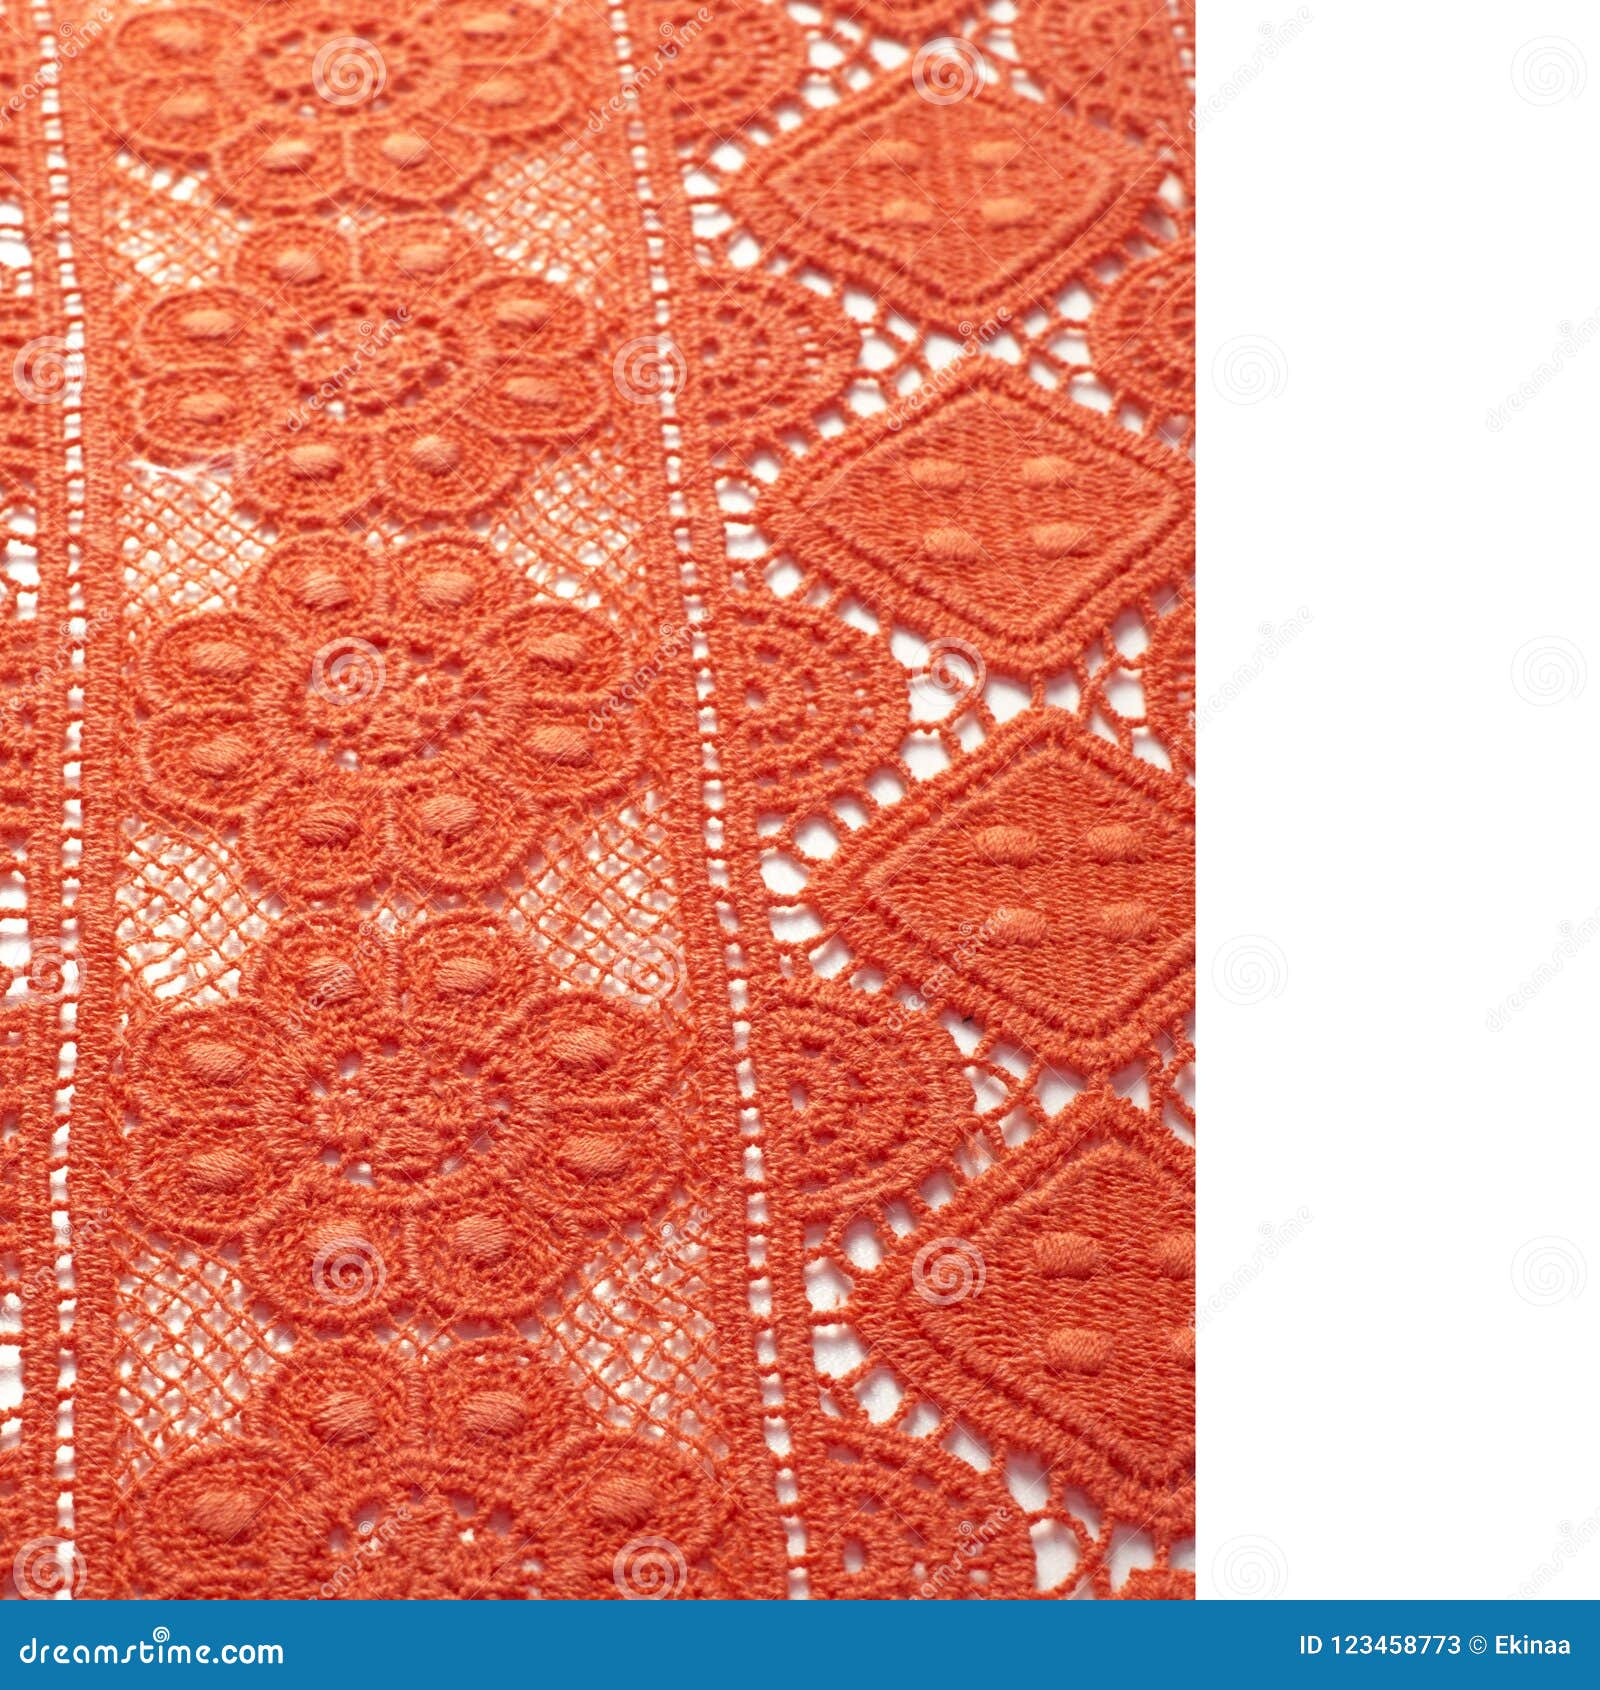 Red lace fabric texture stock image. Image of black - 123458773